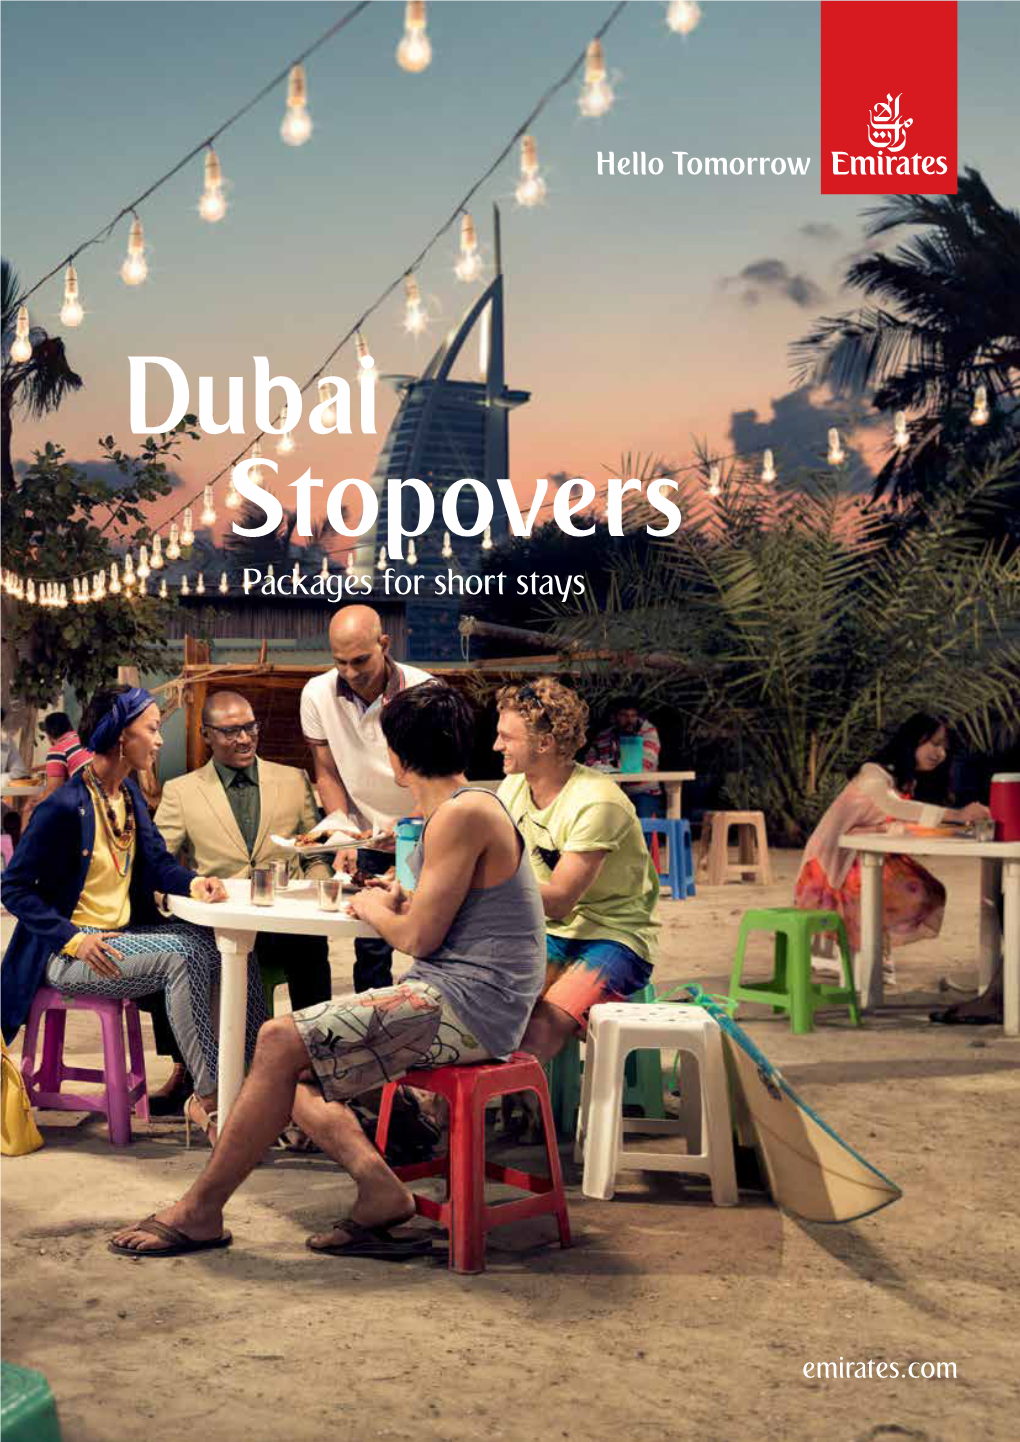 Dubai Stopovers Packages for Short Stays